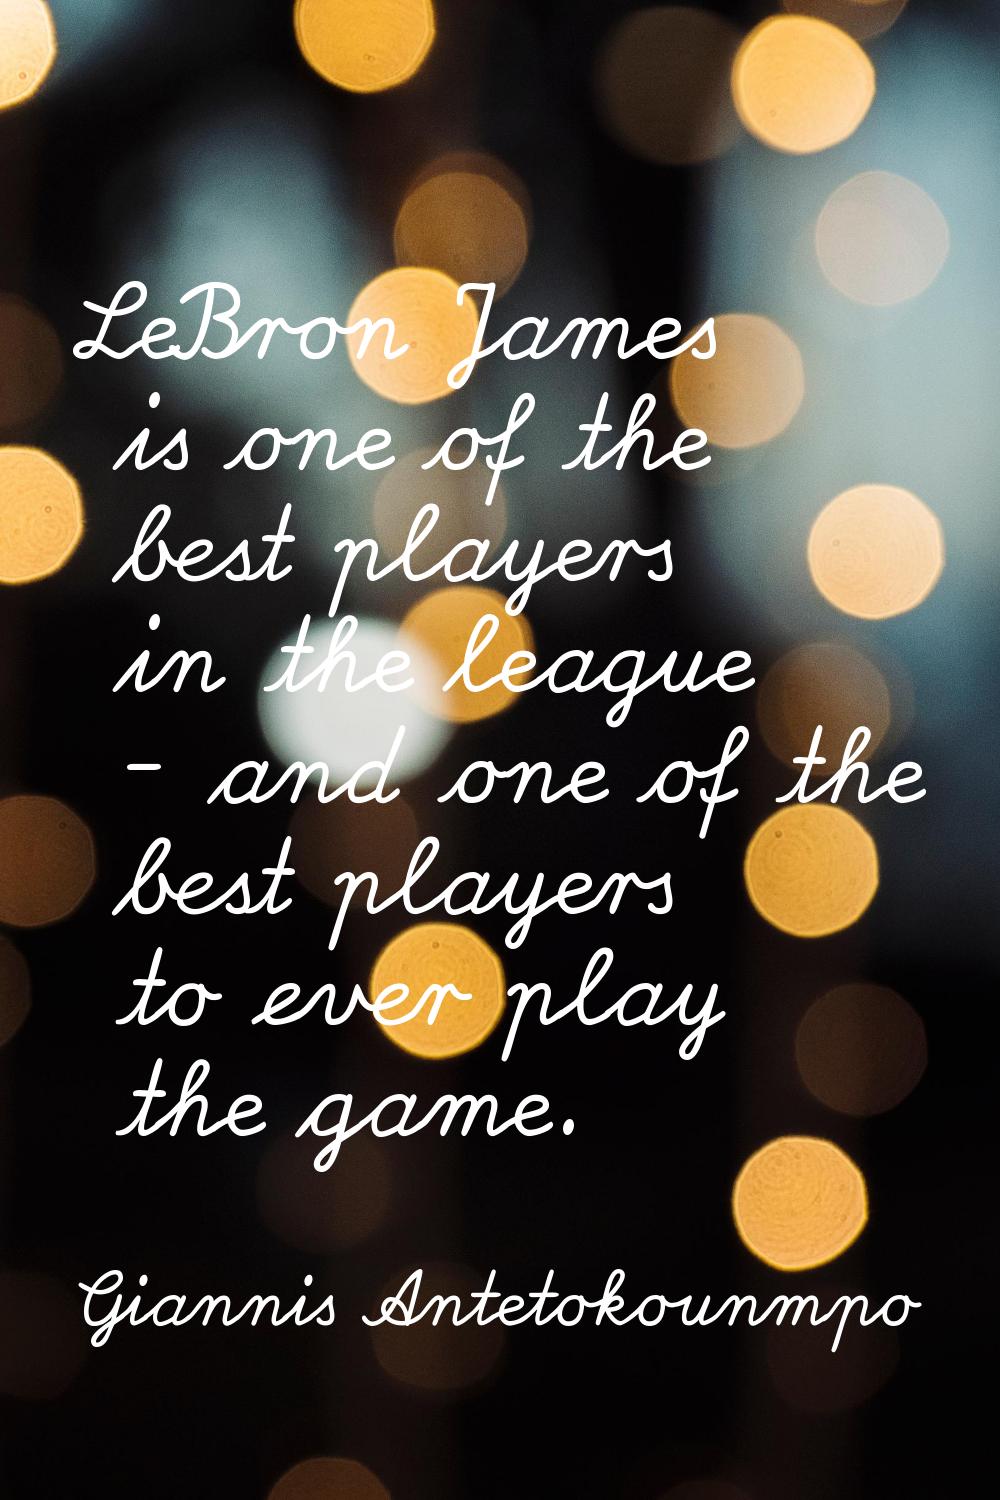 LeBron James is one of the best players in the league - and one of the best players to ever play th